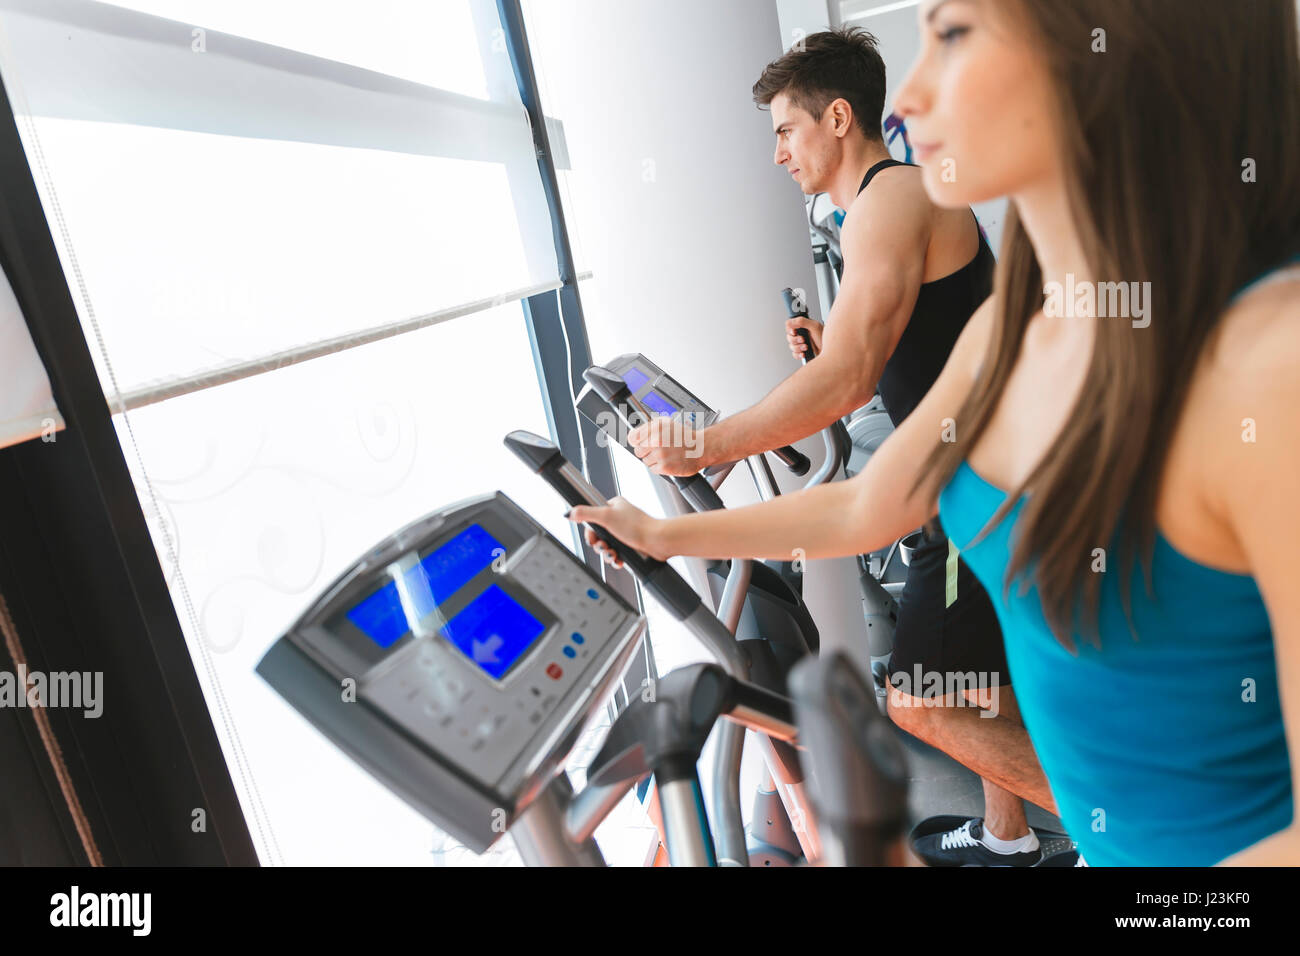 People exercising in gym to keep body in shape Stock Photo